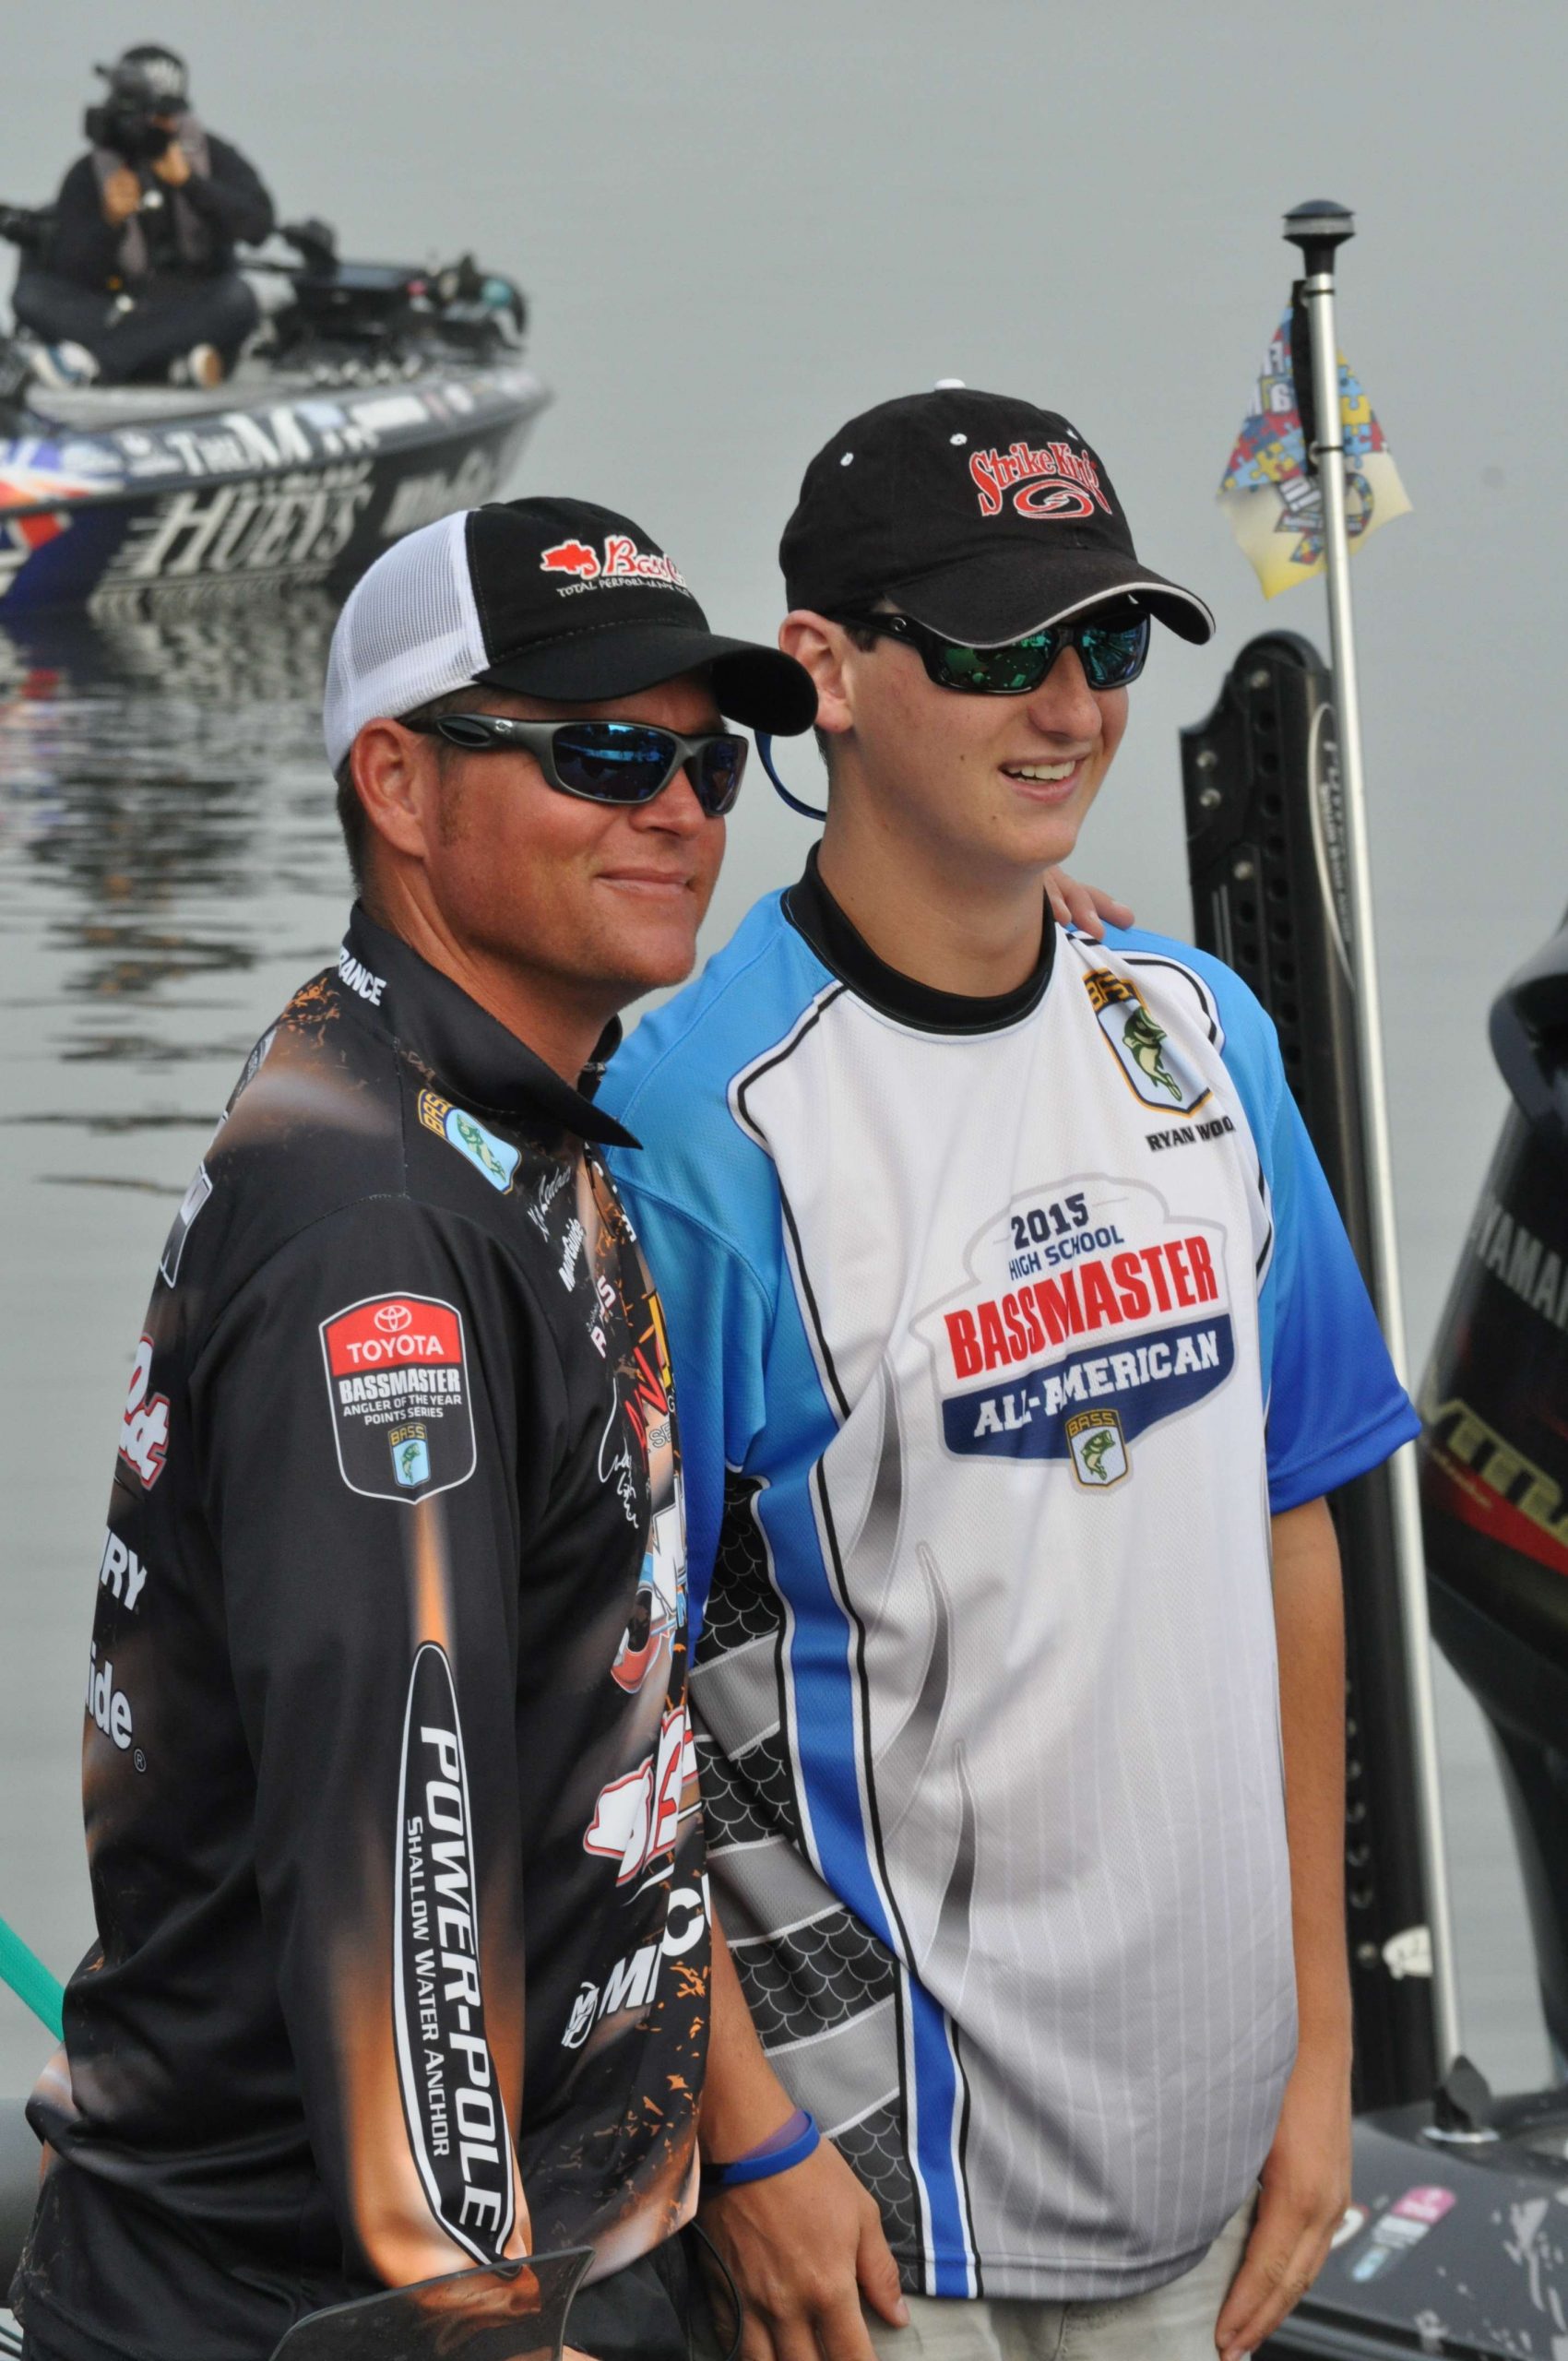 The 12 anglers on the first-ever Bassmaster High School All-American team were paired with 12 Elite Series pros for a day on Tennessee's Lake Barkley. Elite Series pro Kevin Ledoux poses with his All-American partner, Ryan Wood, prior to launch.